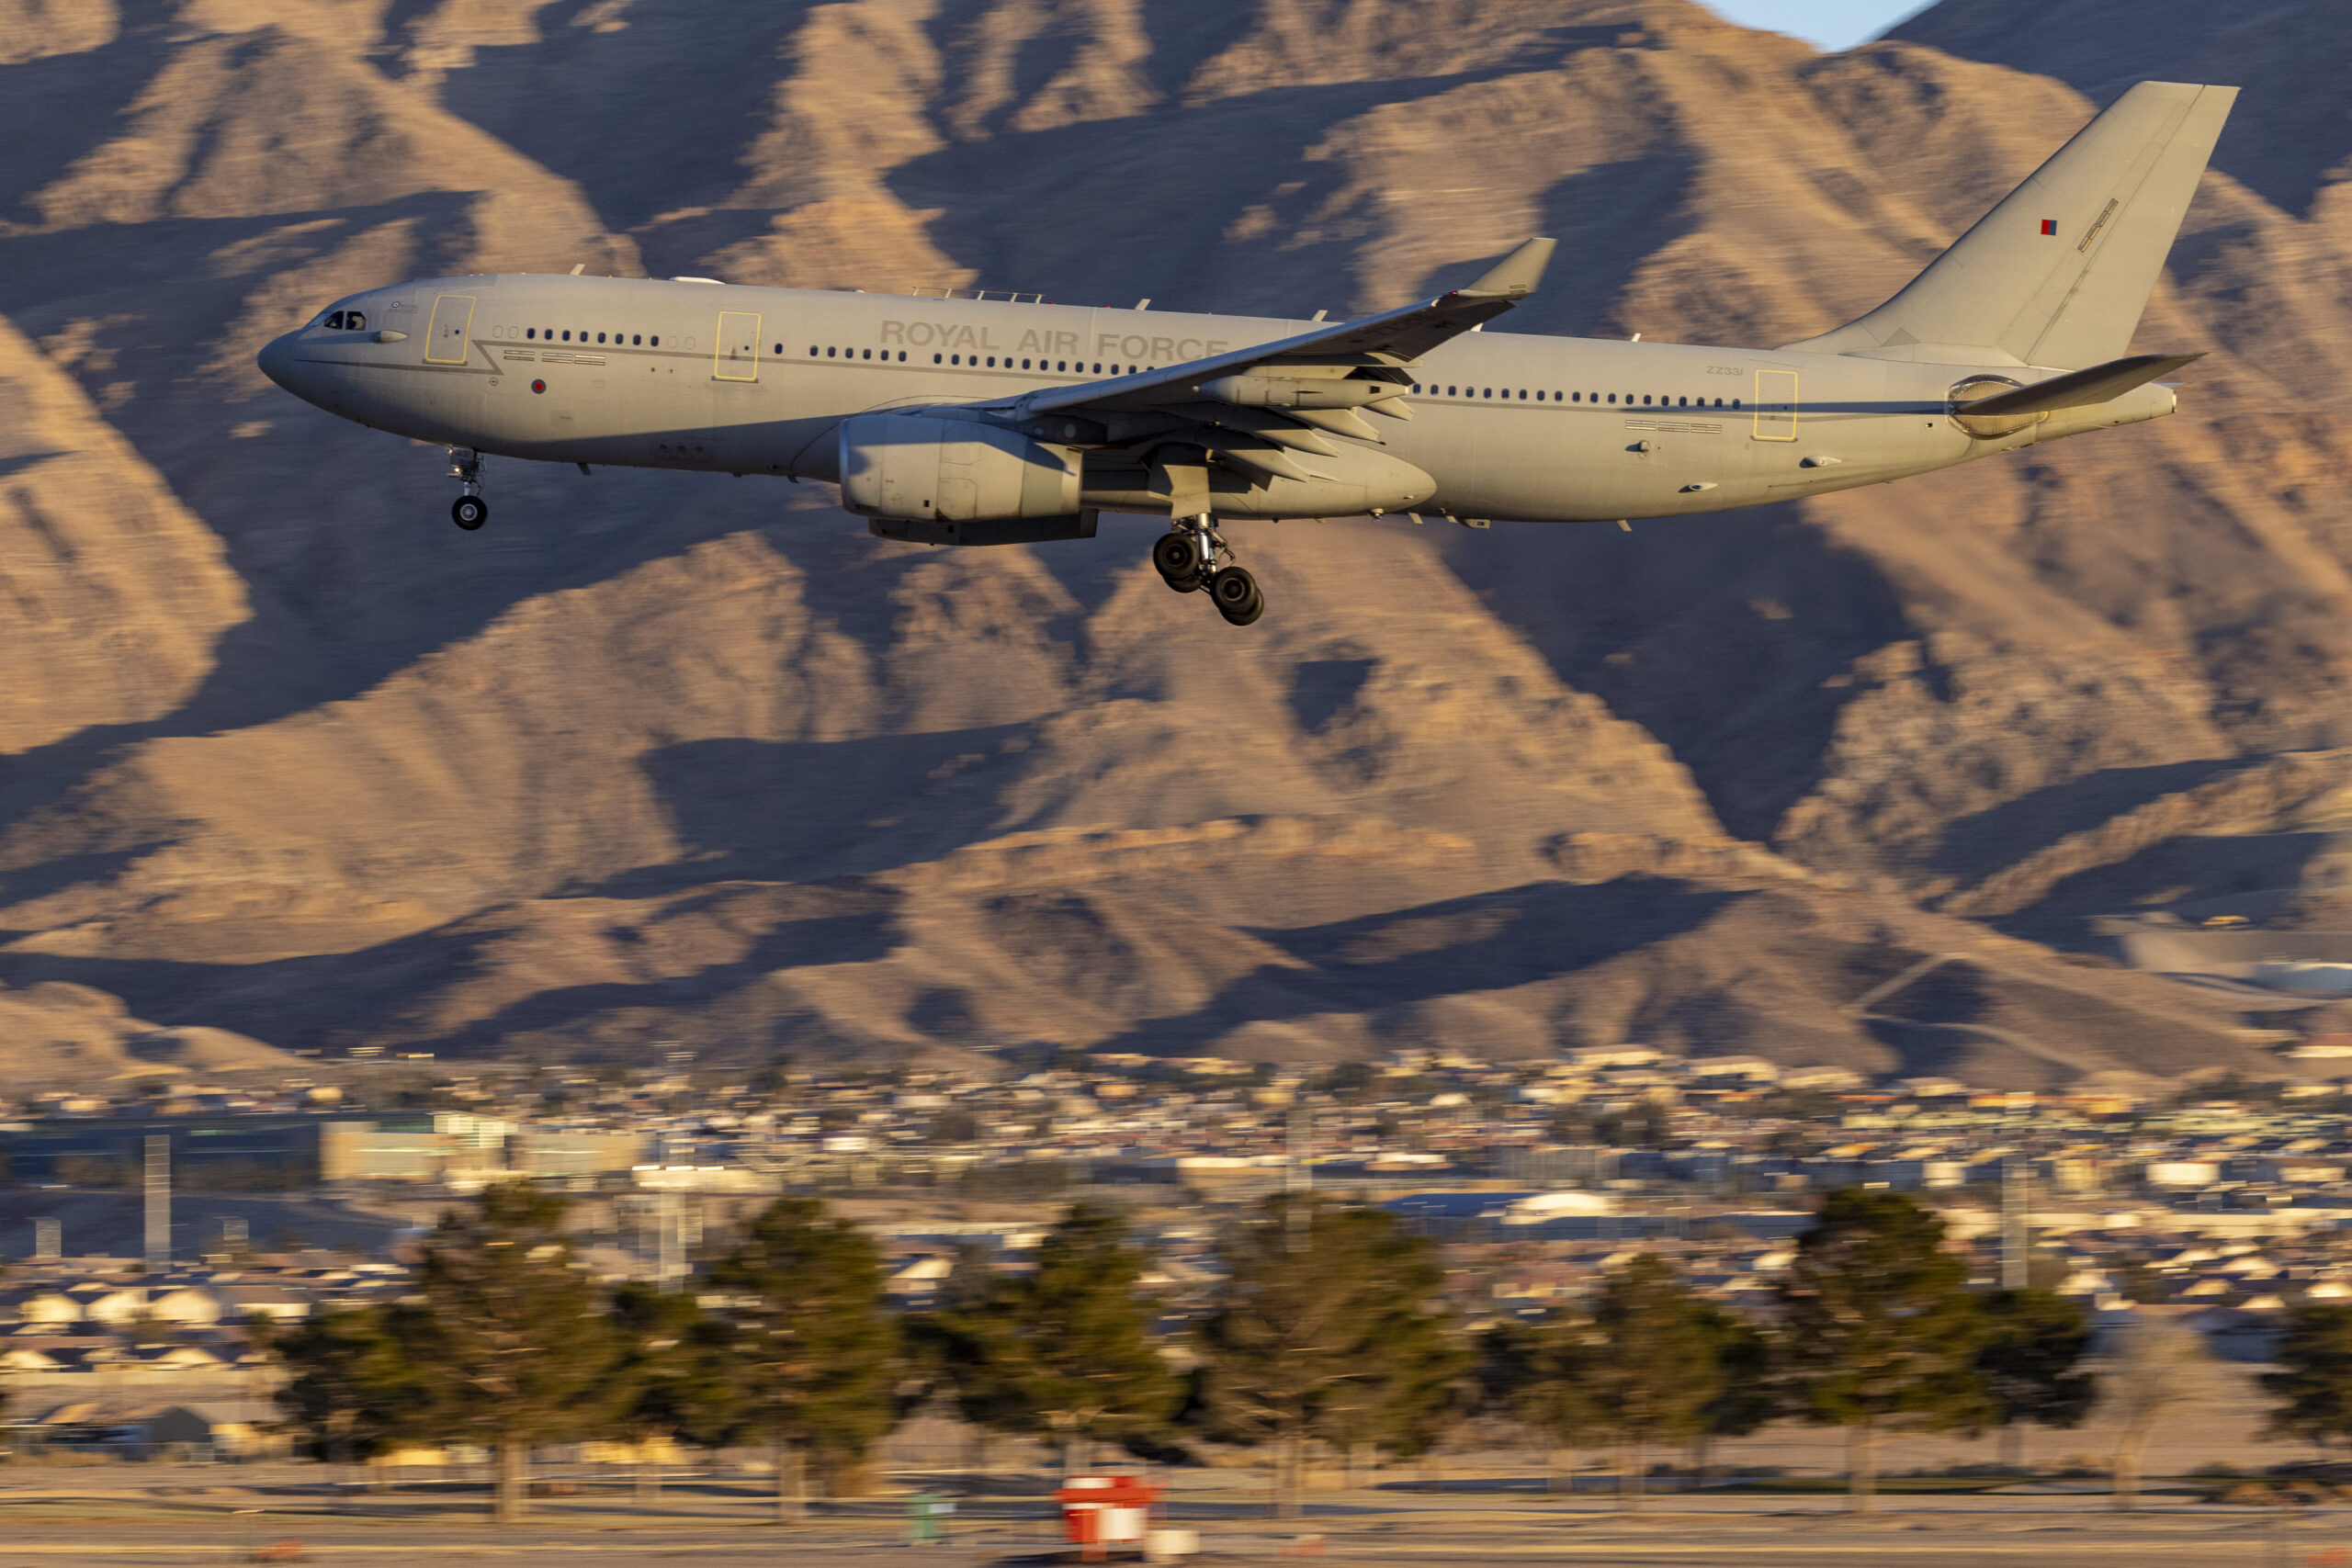 Image shows a. RAF Voyager from RAF Brize Norton landing at Nellis Air Force Base during Red Flag 23-1. A Royal Air Force detachment, operating from Nellis Air Base Nevada, is honing its cutting-edge air combat skills in the largest scale Exercise Red Flag to date. Exercise Red Flag is the pre-eminent annual air combat training exercise run by the United States. The United States Air Force has expanded this long-established exercise to include a vastly increased geographical area to challenge participants to overcome what USAF planners are calling the Tyranny of Distance in addition to the traditional combat air missions of previous exercises. The Exercise has previously been run over the Nevada Test and Training Range and area of 12,000 square miles of airspace and 2.9 million acres of land. Now training areas in Utah and California have been added, as well as missions being flow out over the Californian Pacific Coast. The exercise area has therefore become vast and is aimed to reflect the challenges of conducting air operations at range The RAF detachment of around 300 personnel currently taking part on the exercise is operating seven Typhoons from RAF Lossiemouth based II (Army Co-operation) Squadron, plus a Voyager operated from 10 and 101 Squadron based at RAF Brize Norton. In addition, aircrew from 51 Squadron based at RAF Waddington have been integrated into the flight crew of a USAF RC-135 Rivet Joint intelligence gathering aircraft. Australia is the only other nation participating, reflecting the close Defence partnership between our three countries.